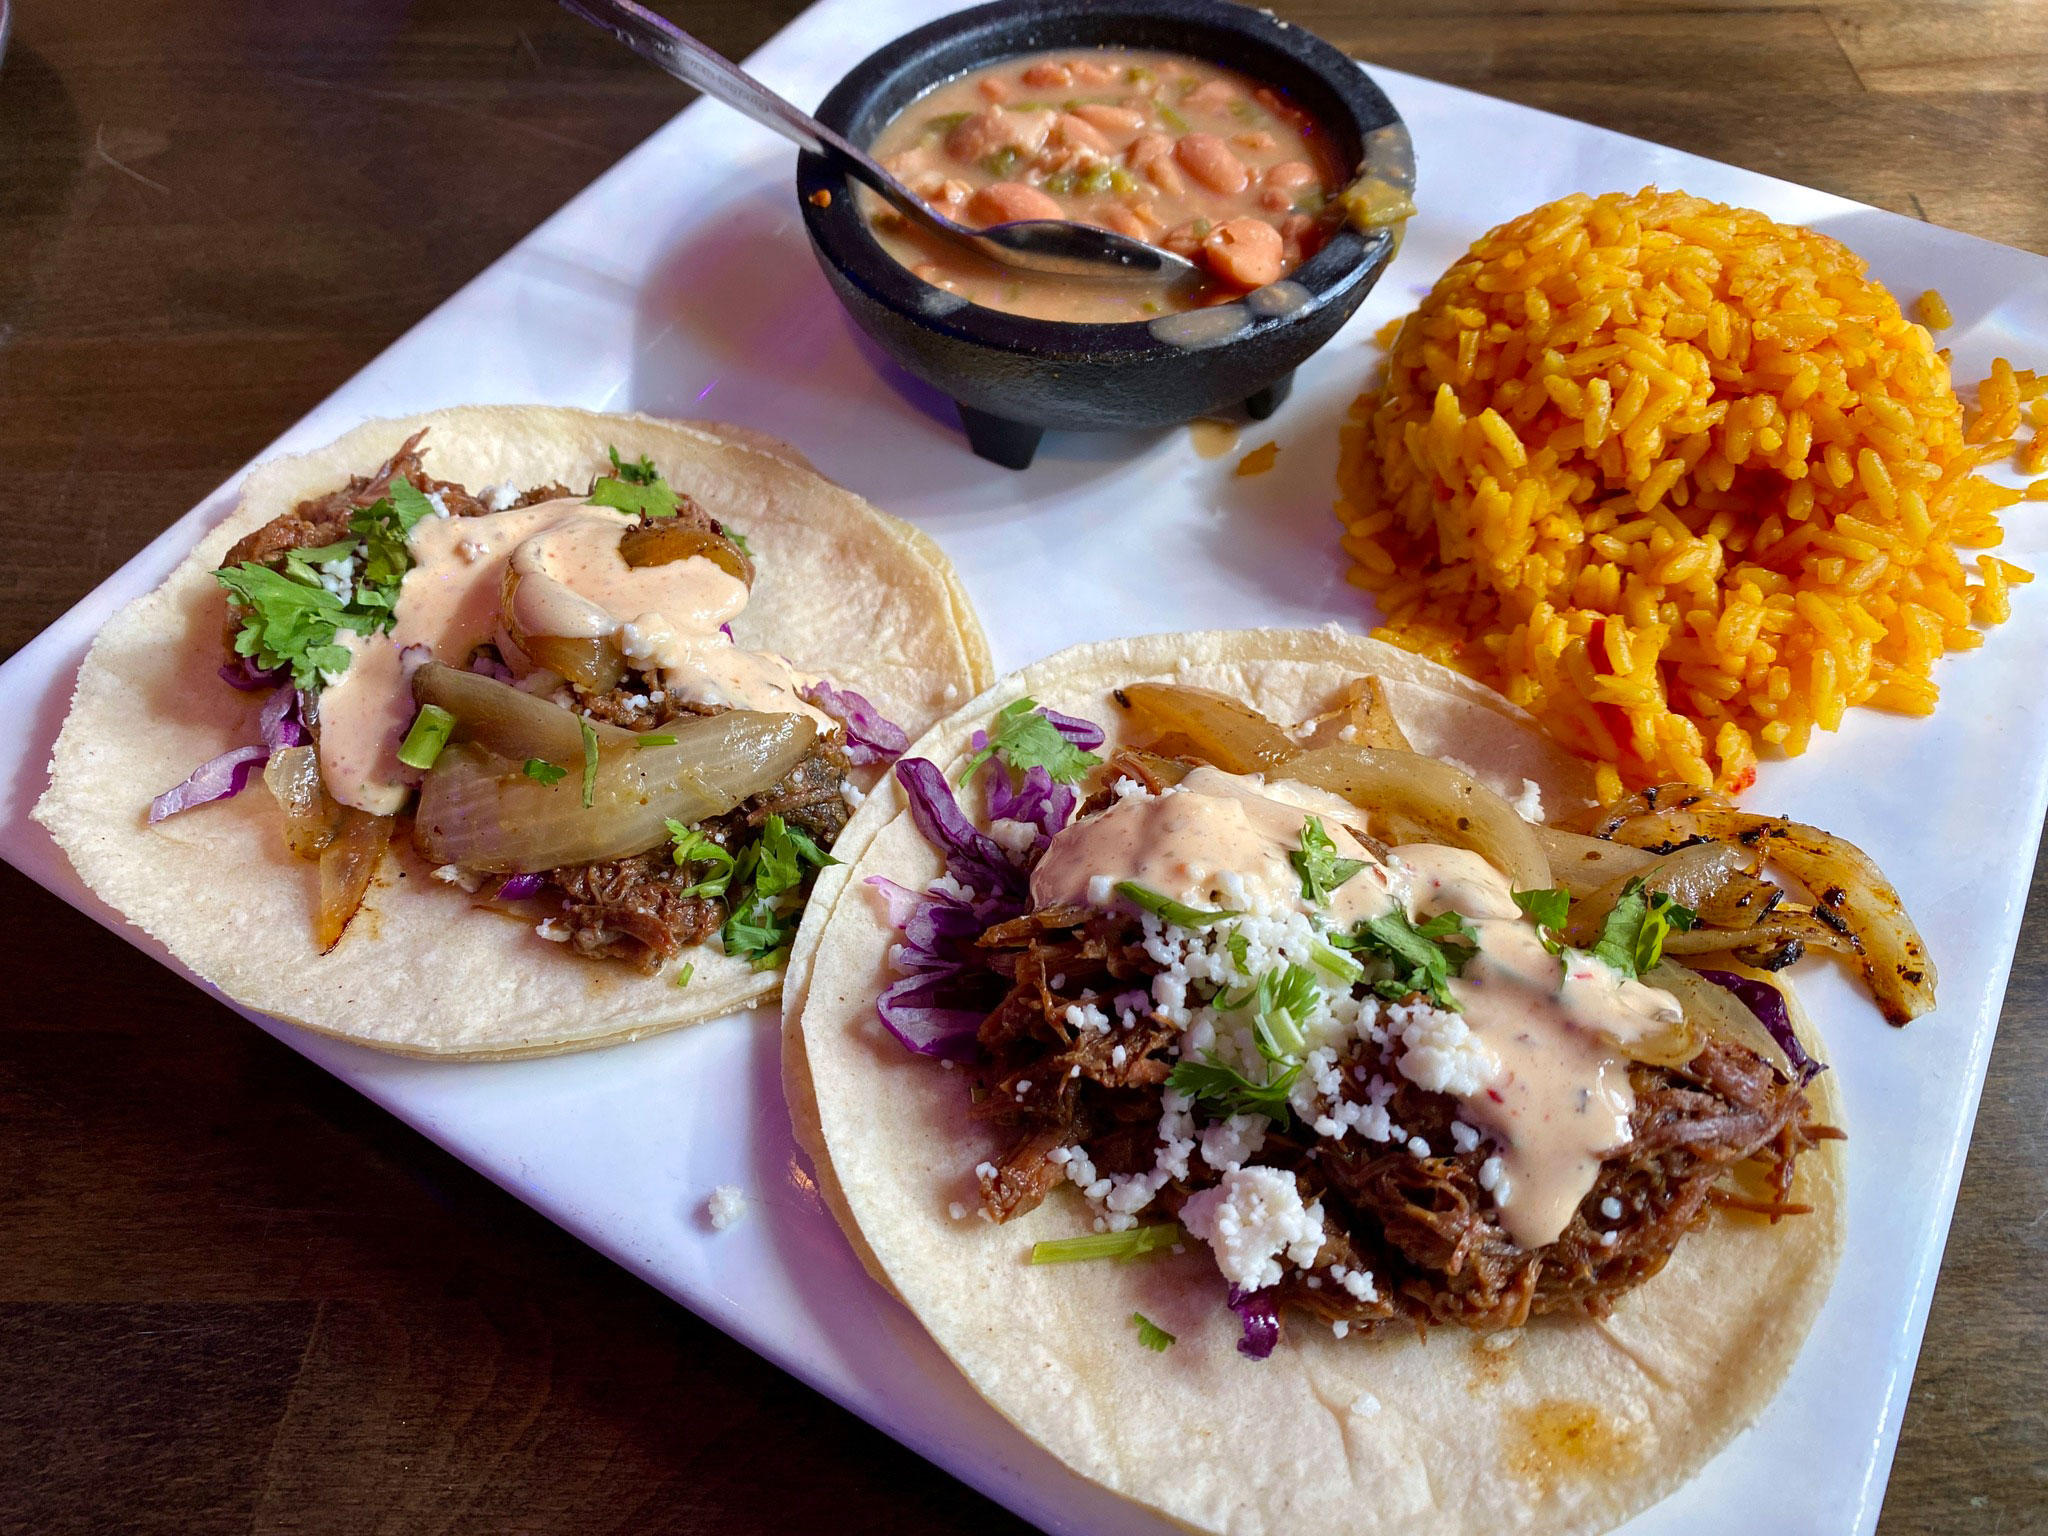 Braised Short Rib Tacos with charro beans and rice